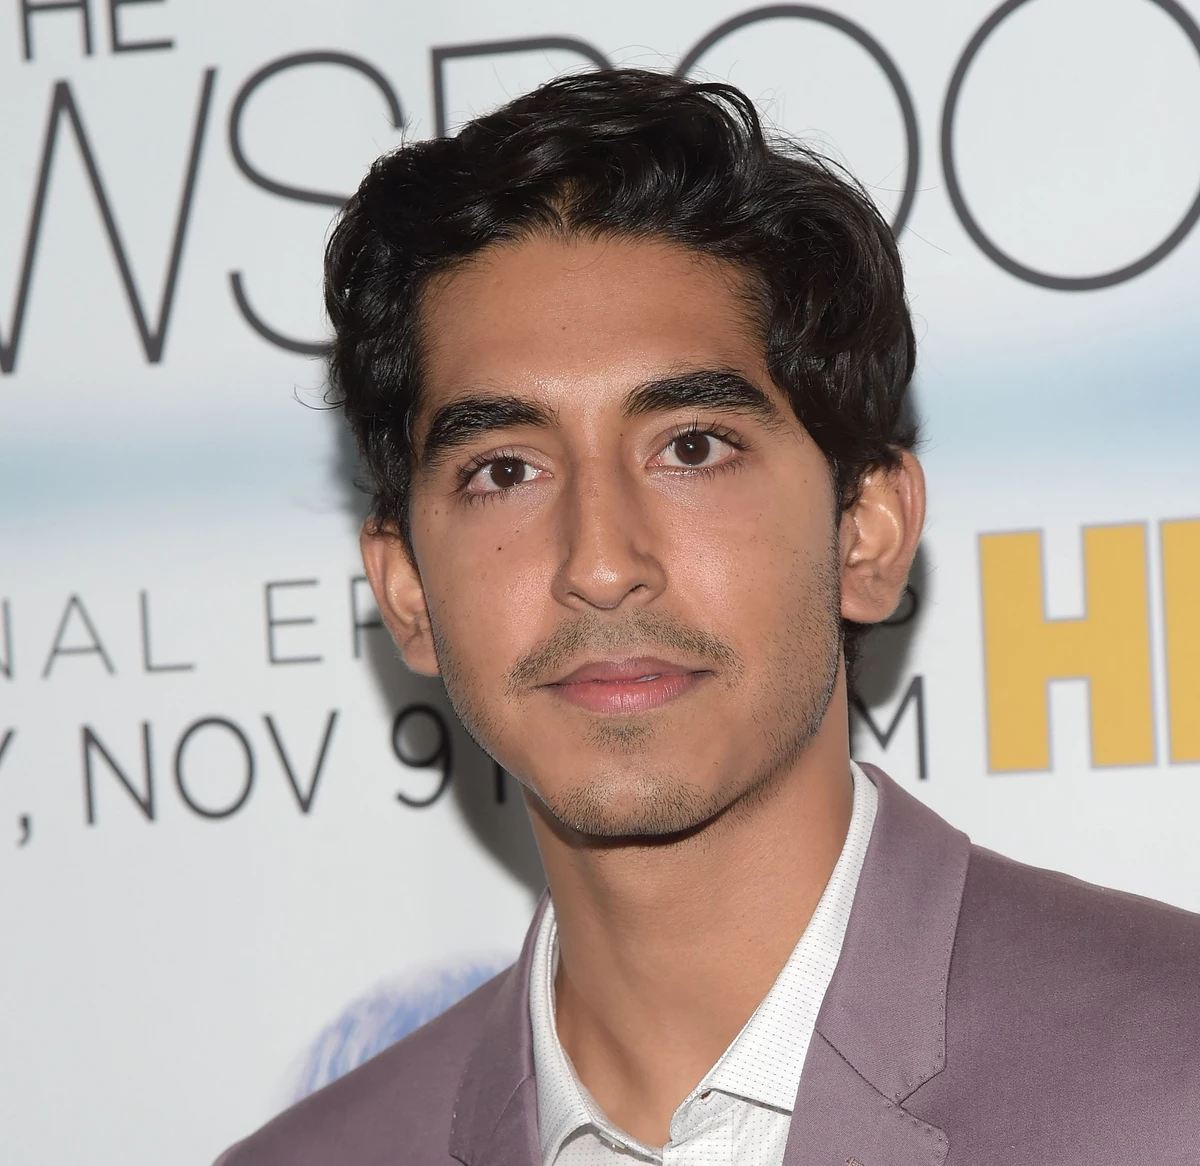 Meat at the Movies: Two of Three for Dev Patel